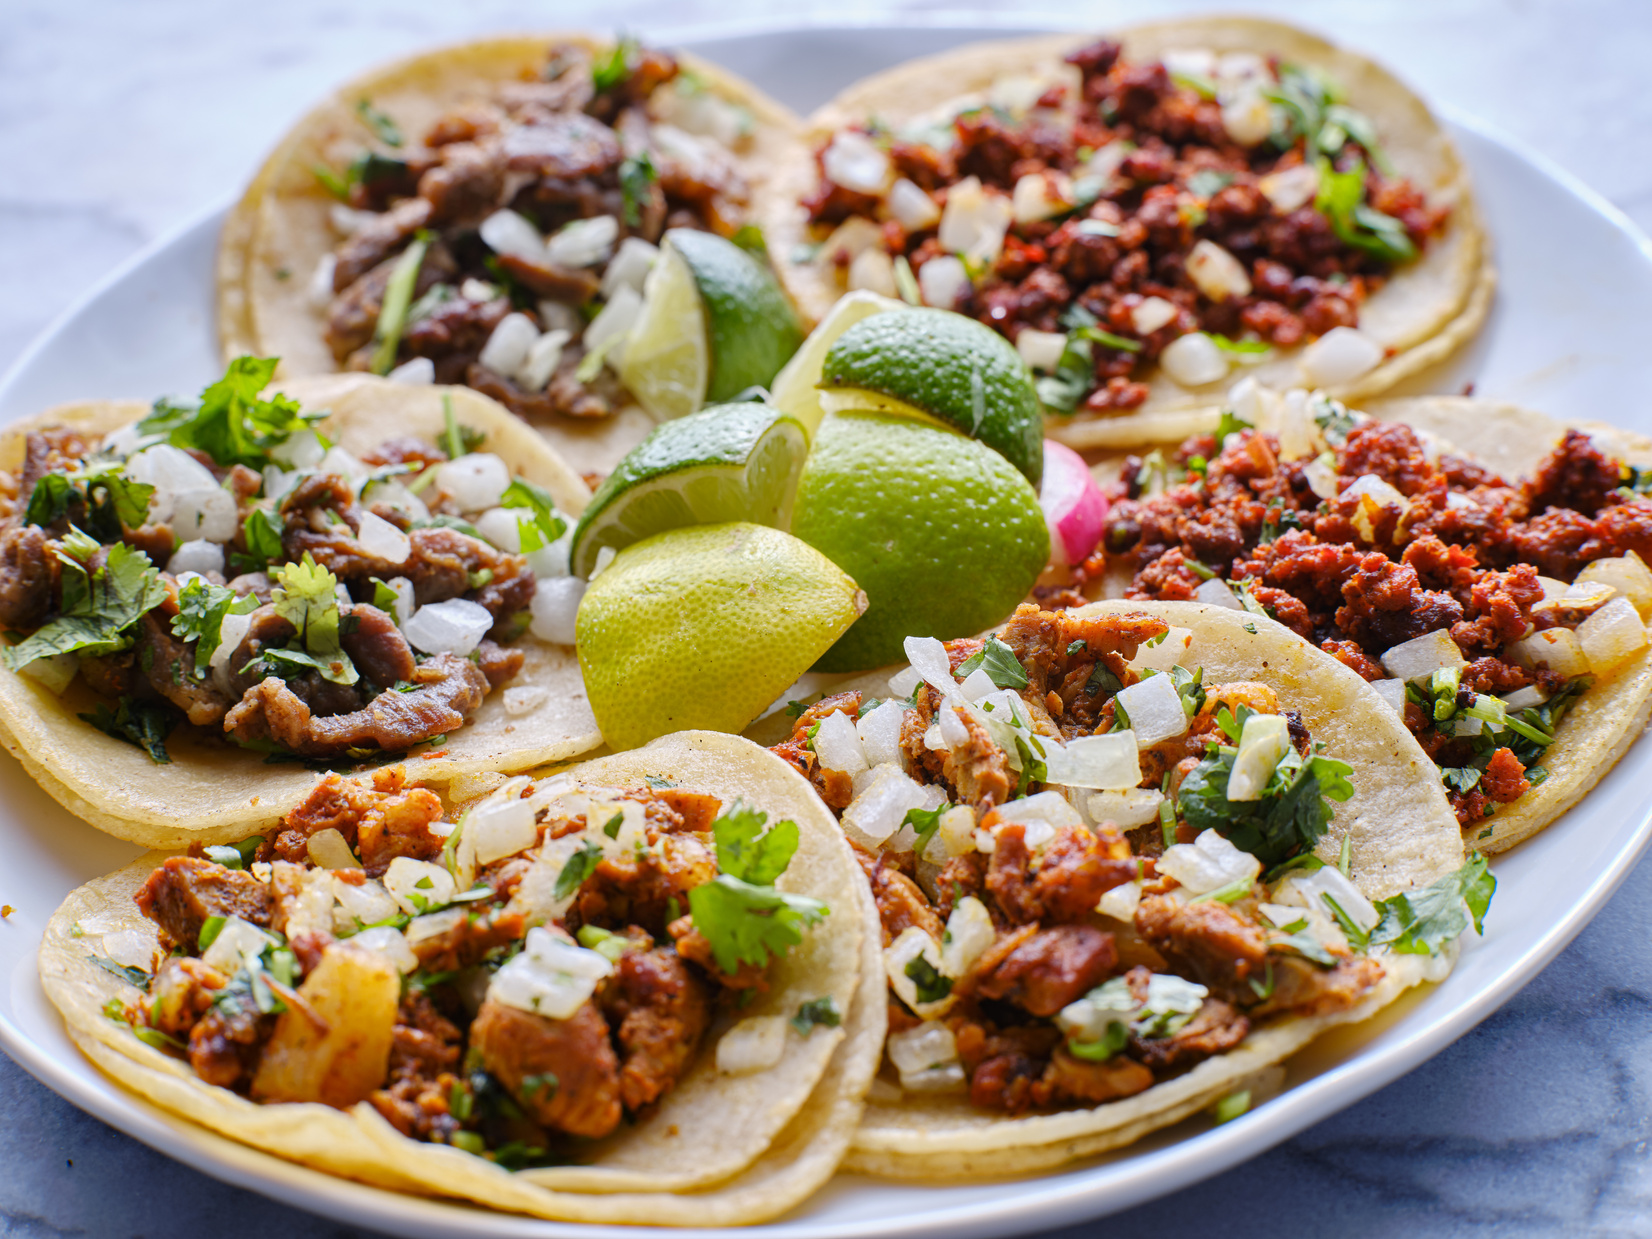 Platter of Assorted Mexican Street Tacos